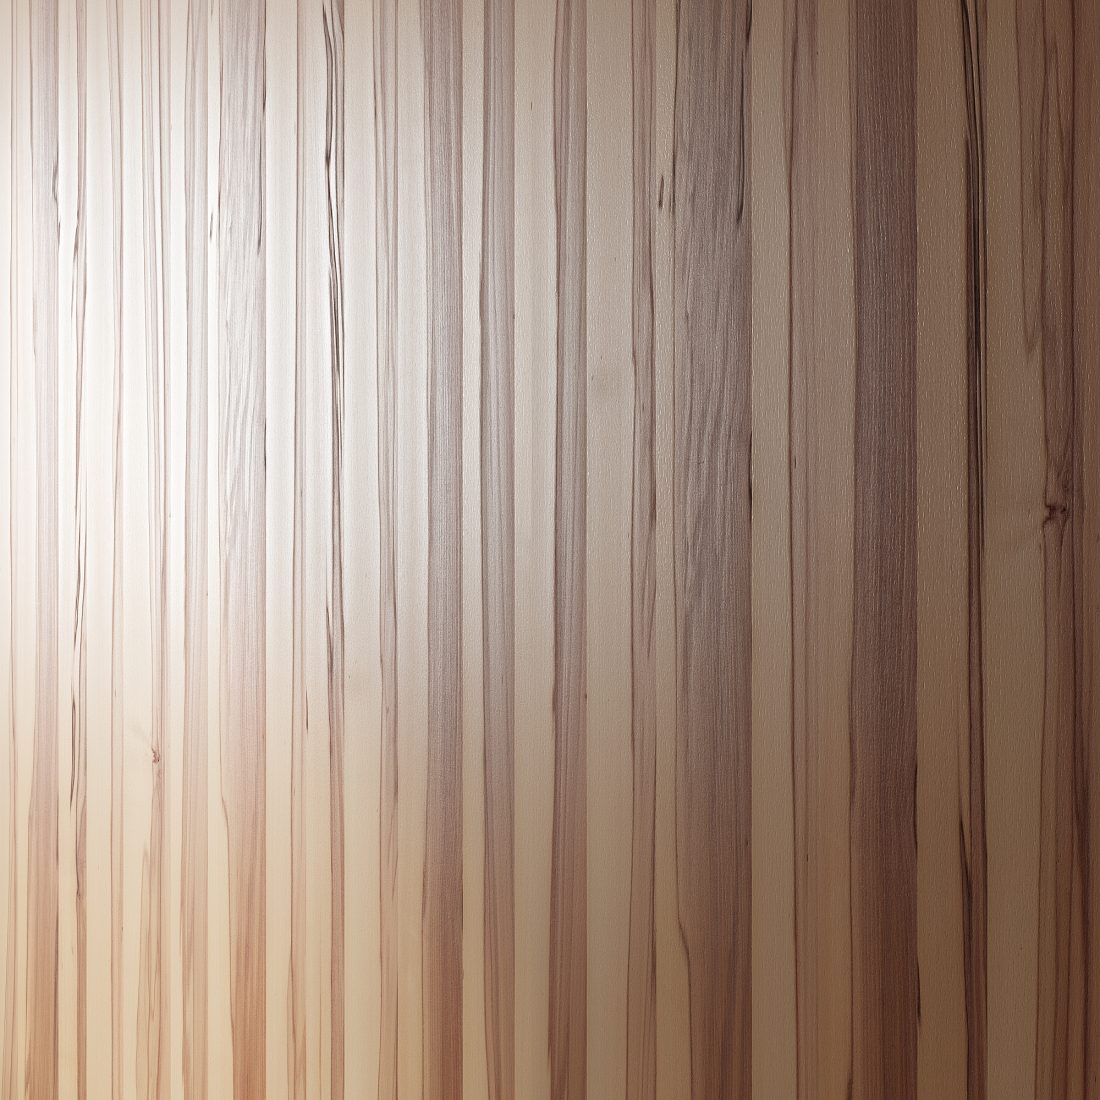 Wood Material Pbr, Seamless - 3D Model for Corona